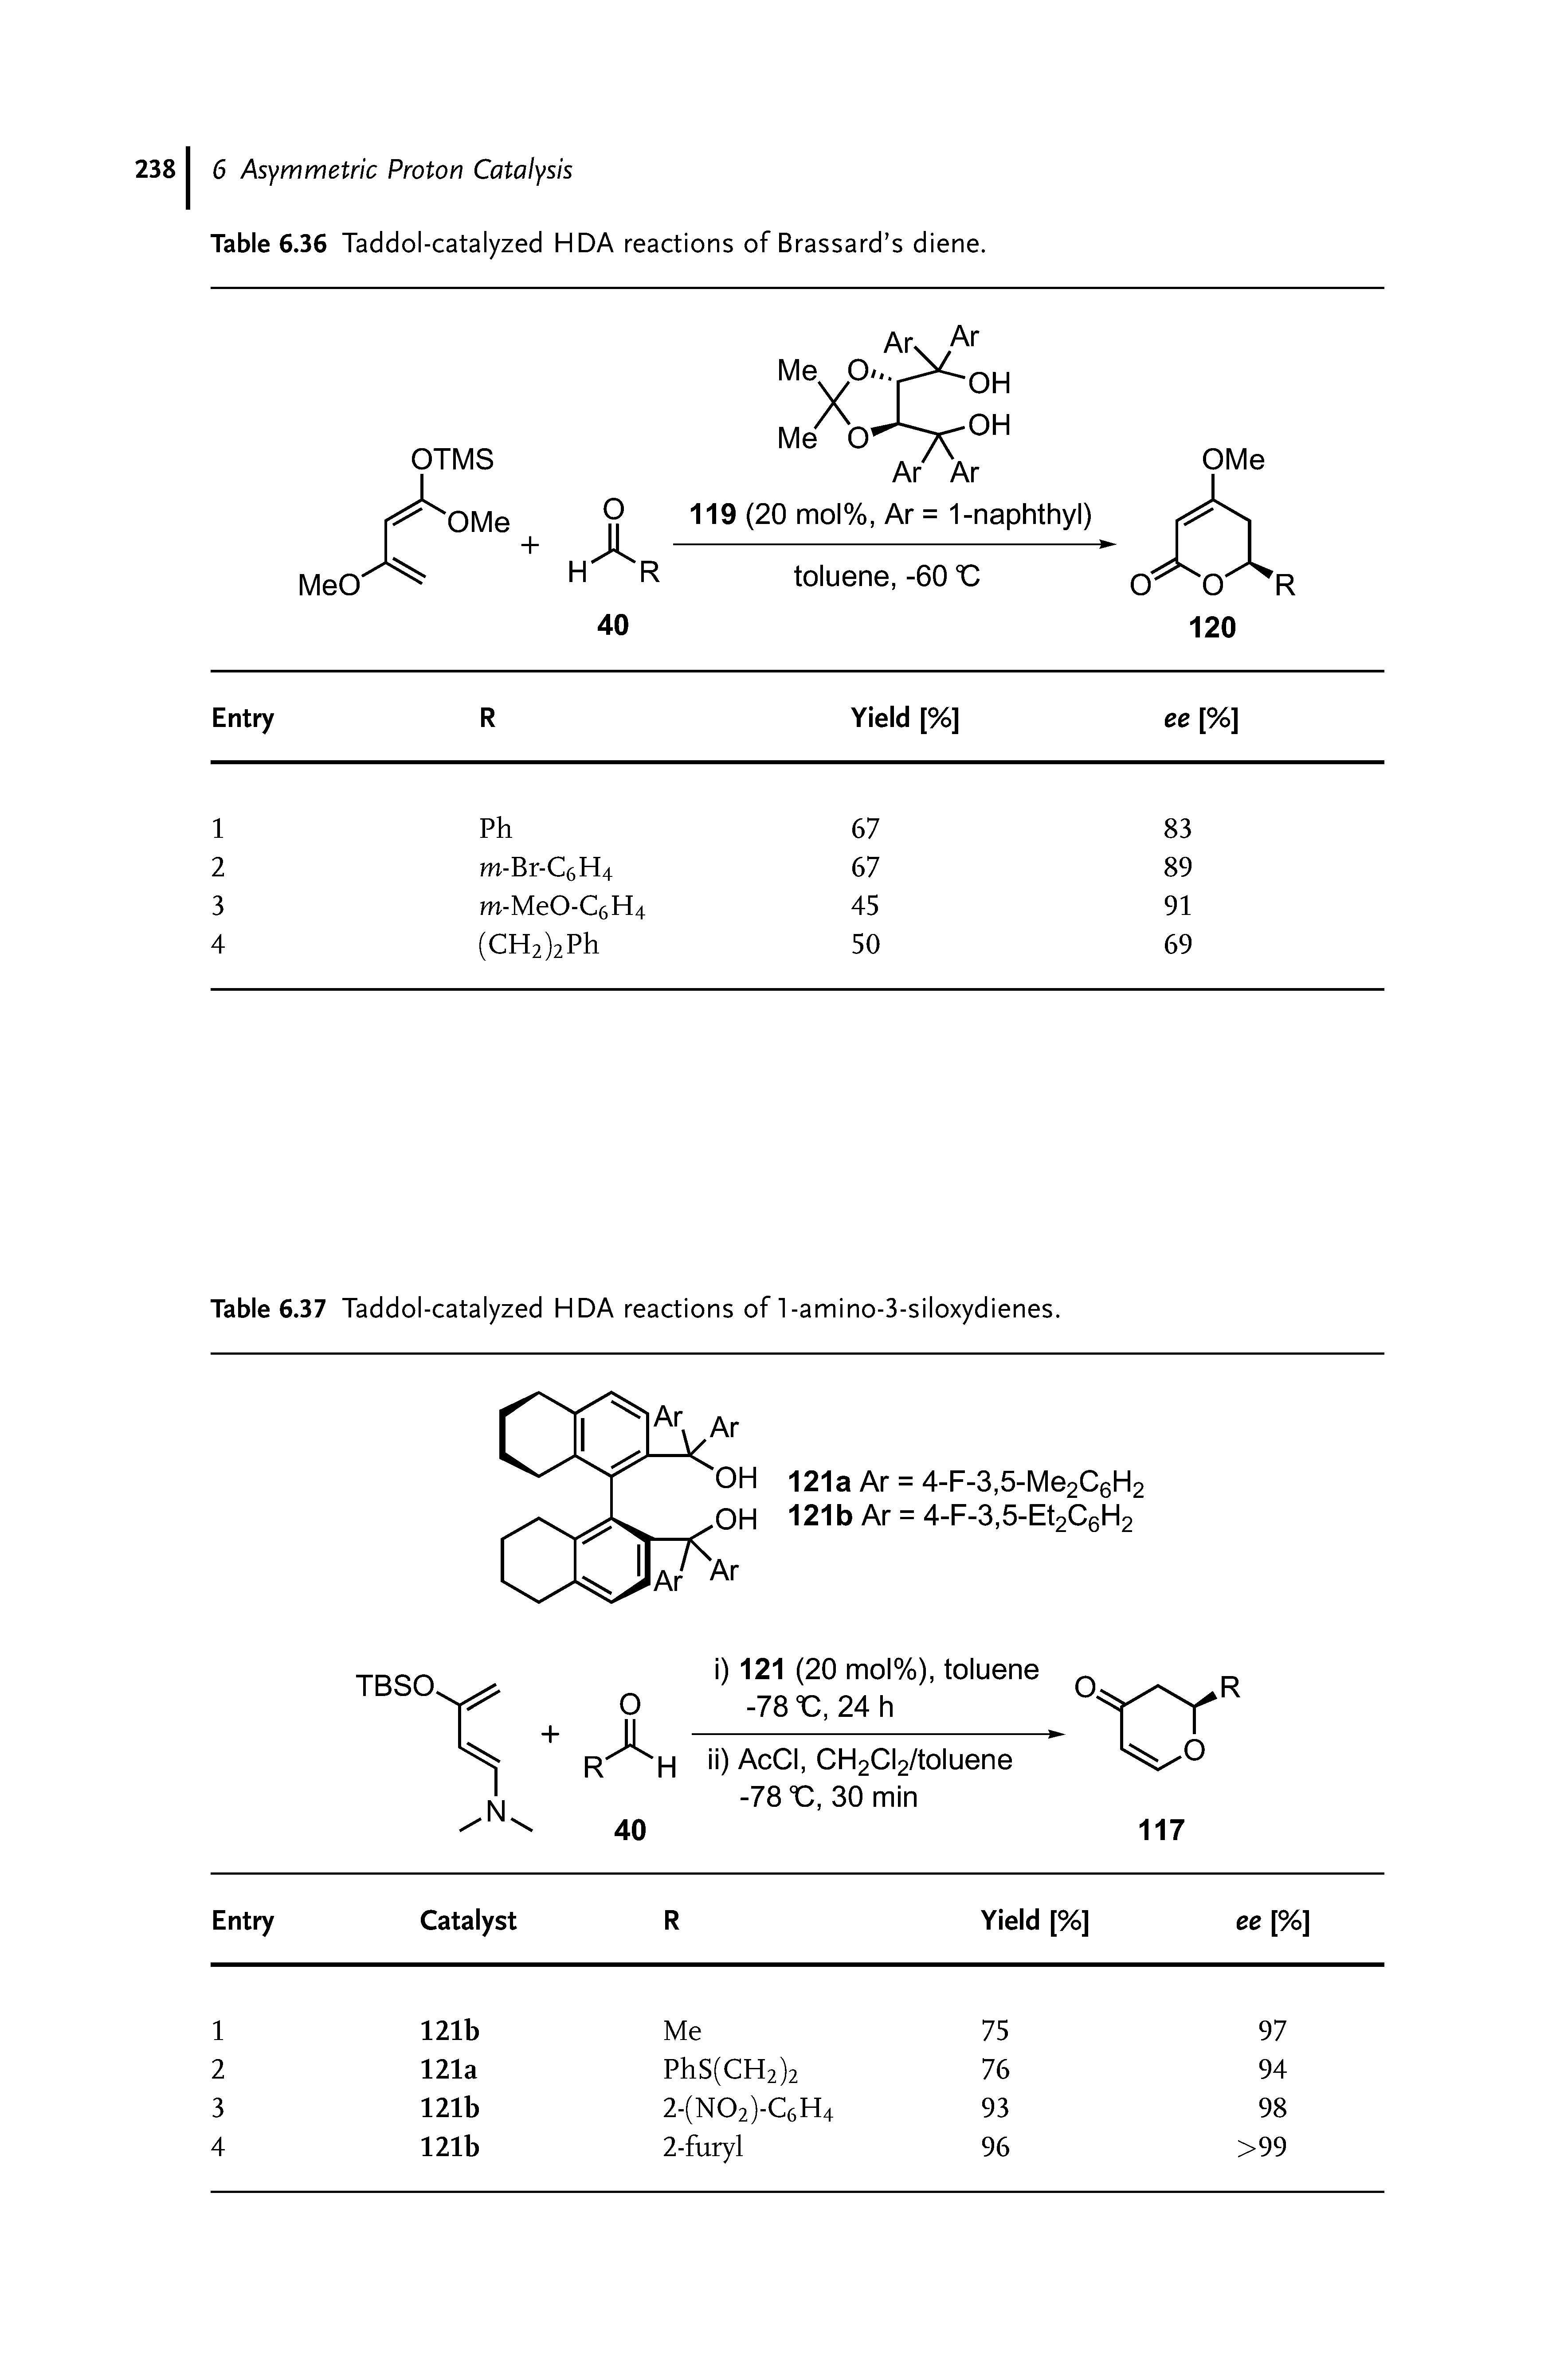 Table 6.37 Taddol-catalyzed HDA reactions of 1-amino-3-siloxydienes.